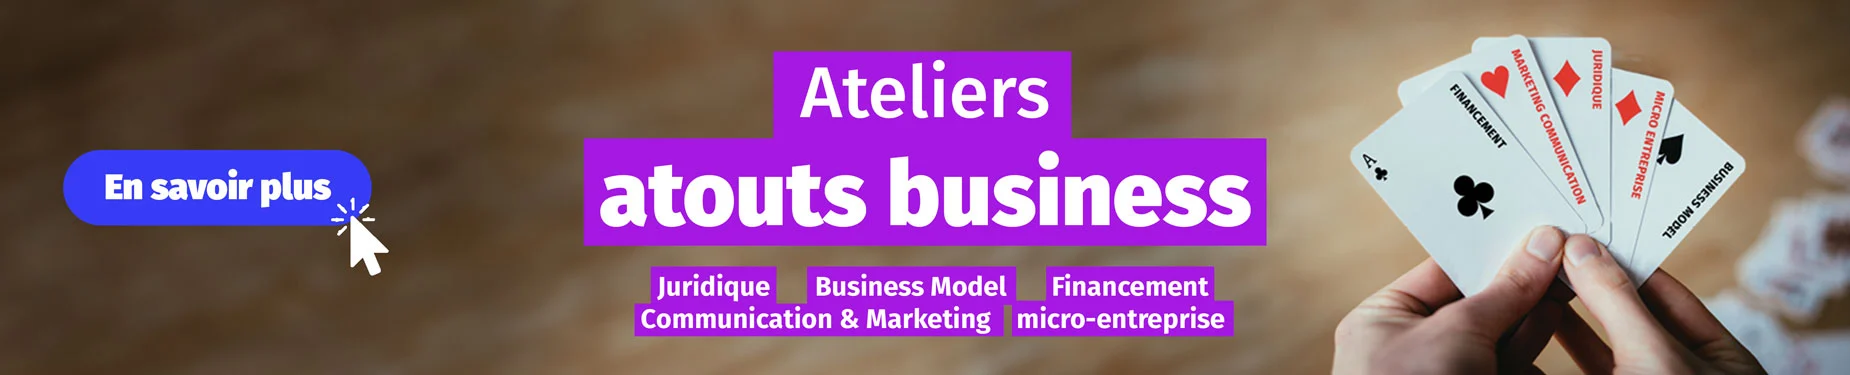 Ateliers atouts business